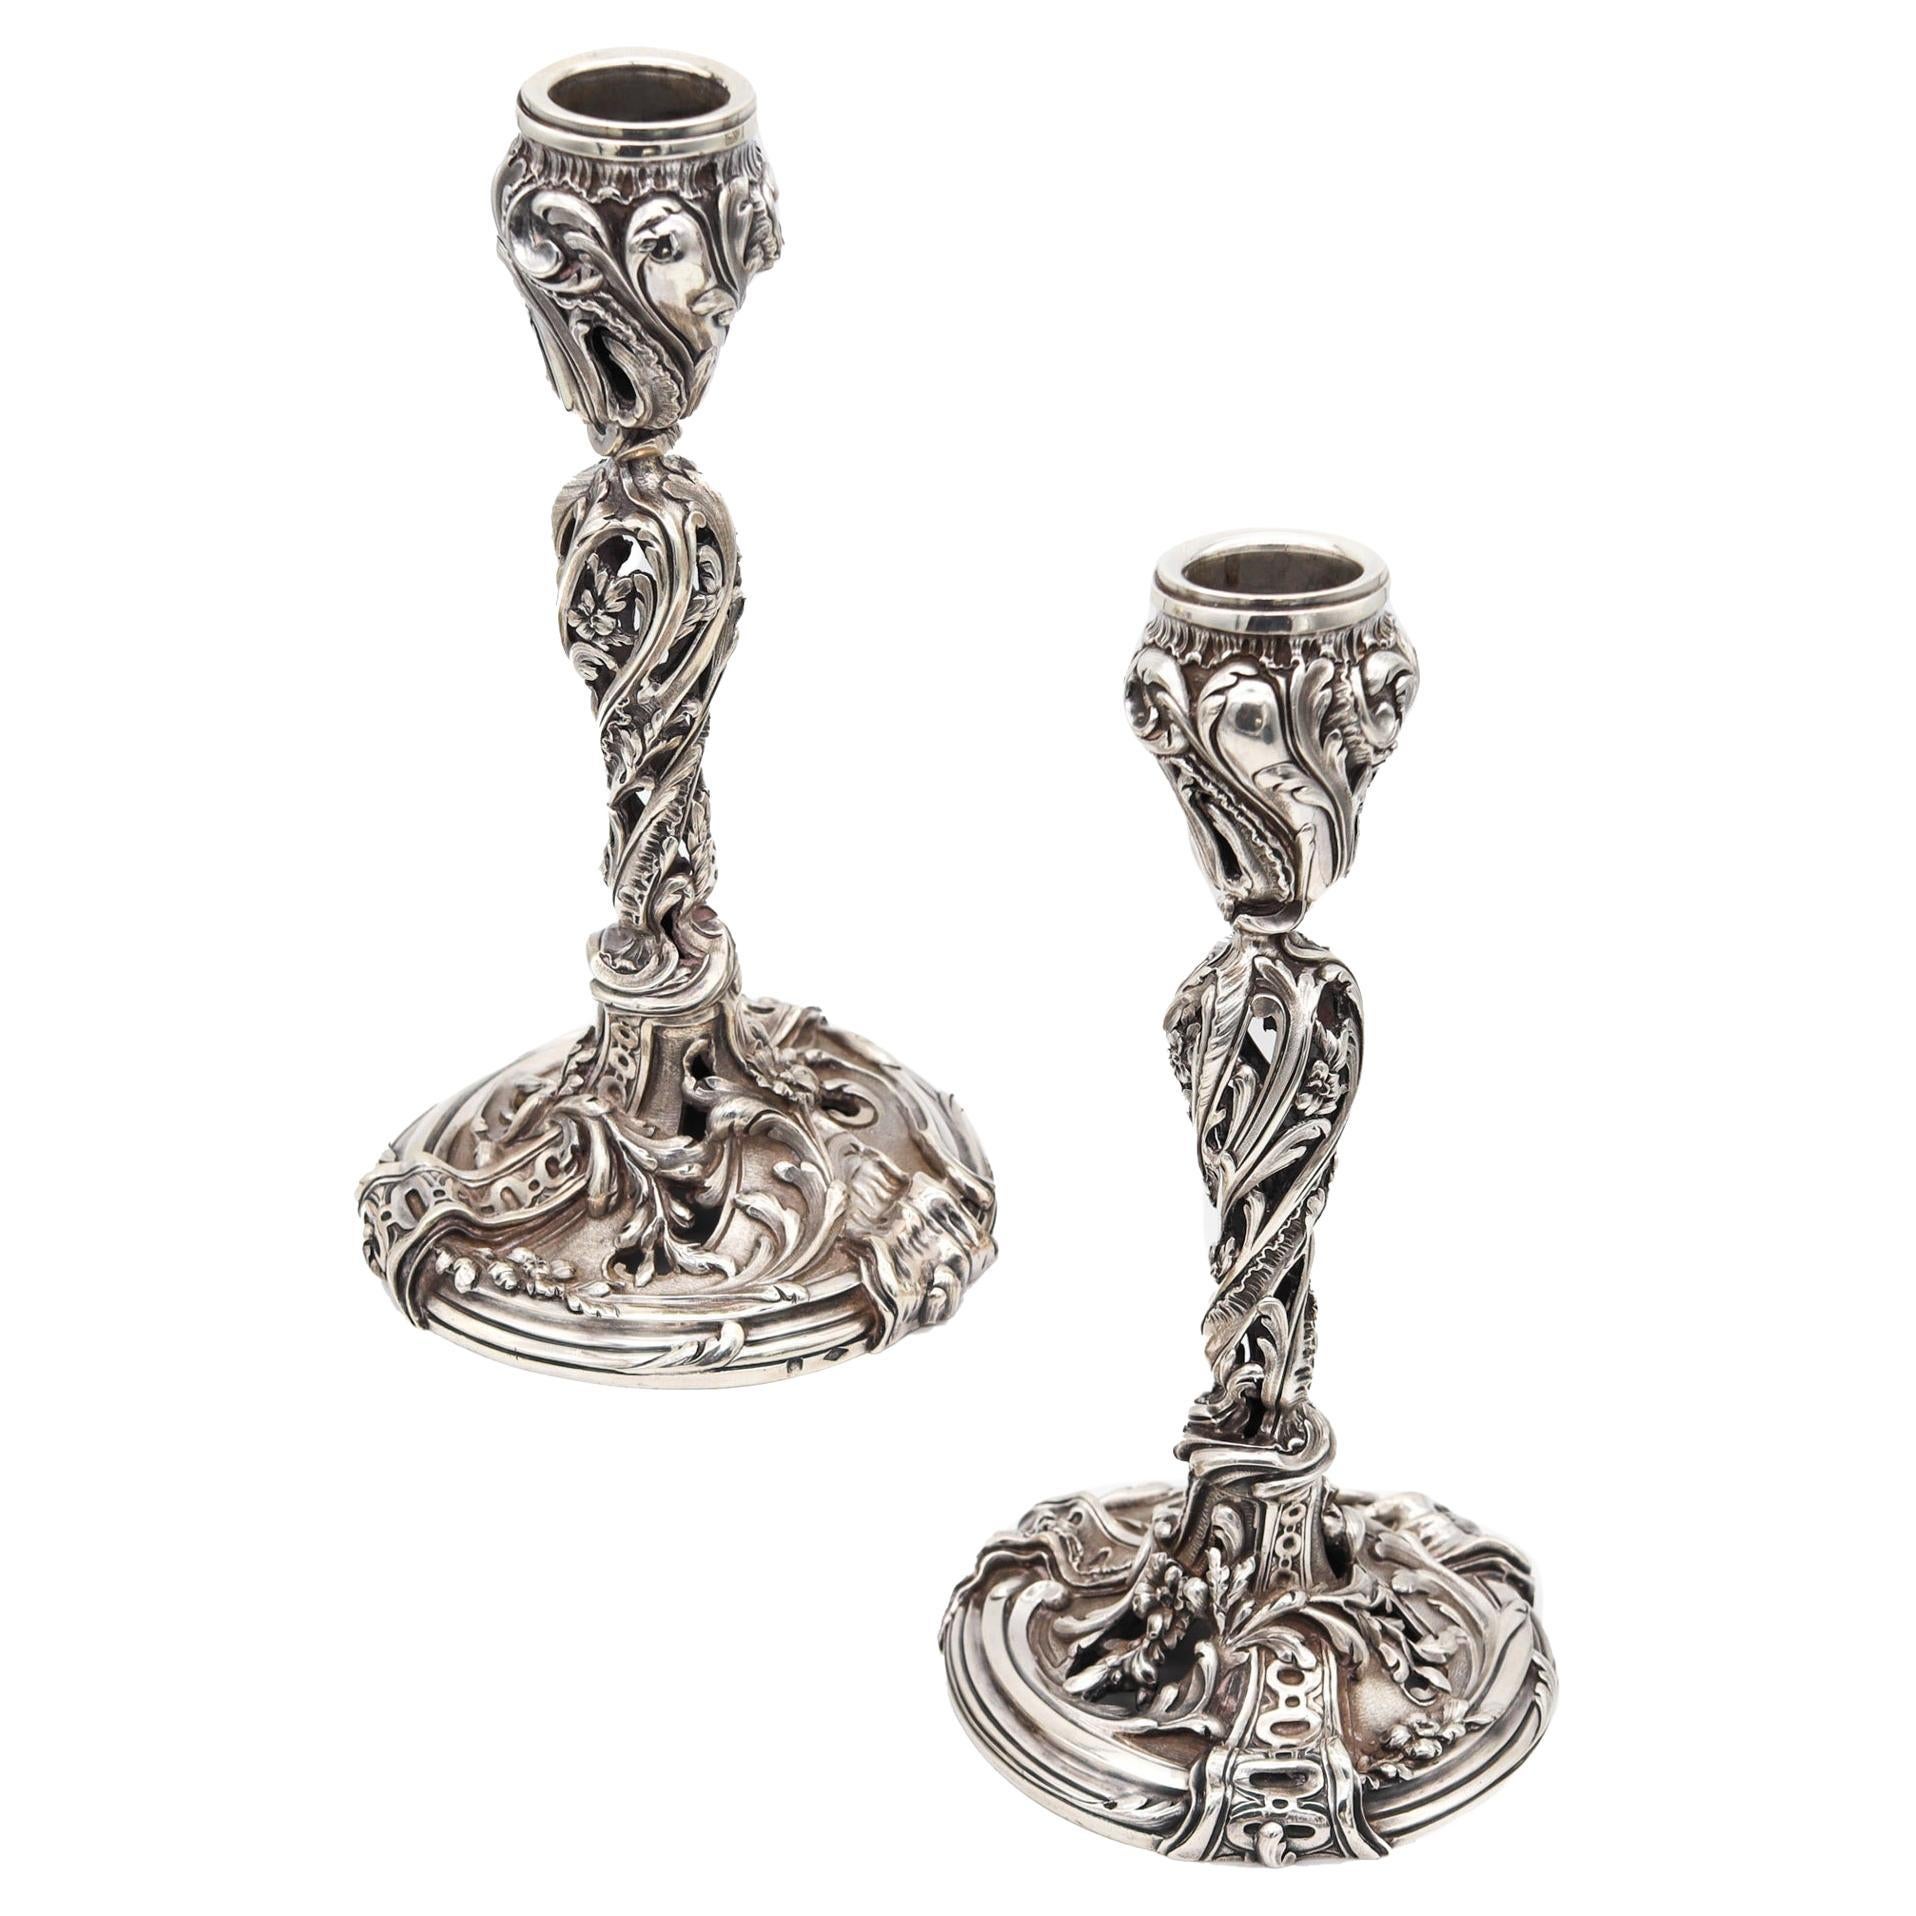 Charles Harleux 1895 Paris Art Nouveau Pair of Candlestick in Sterling Silver For Sale